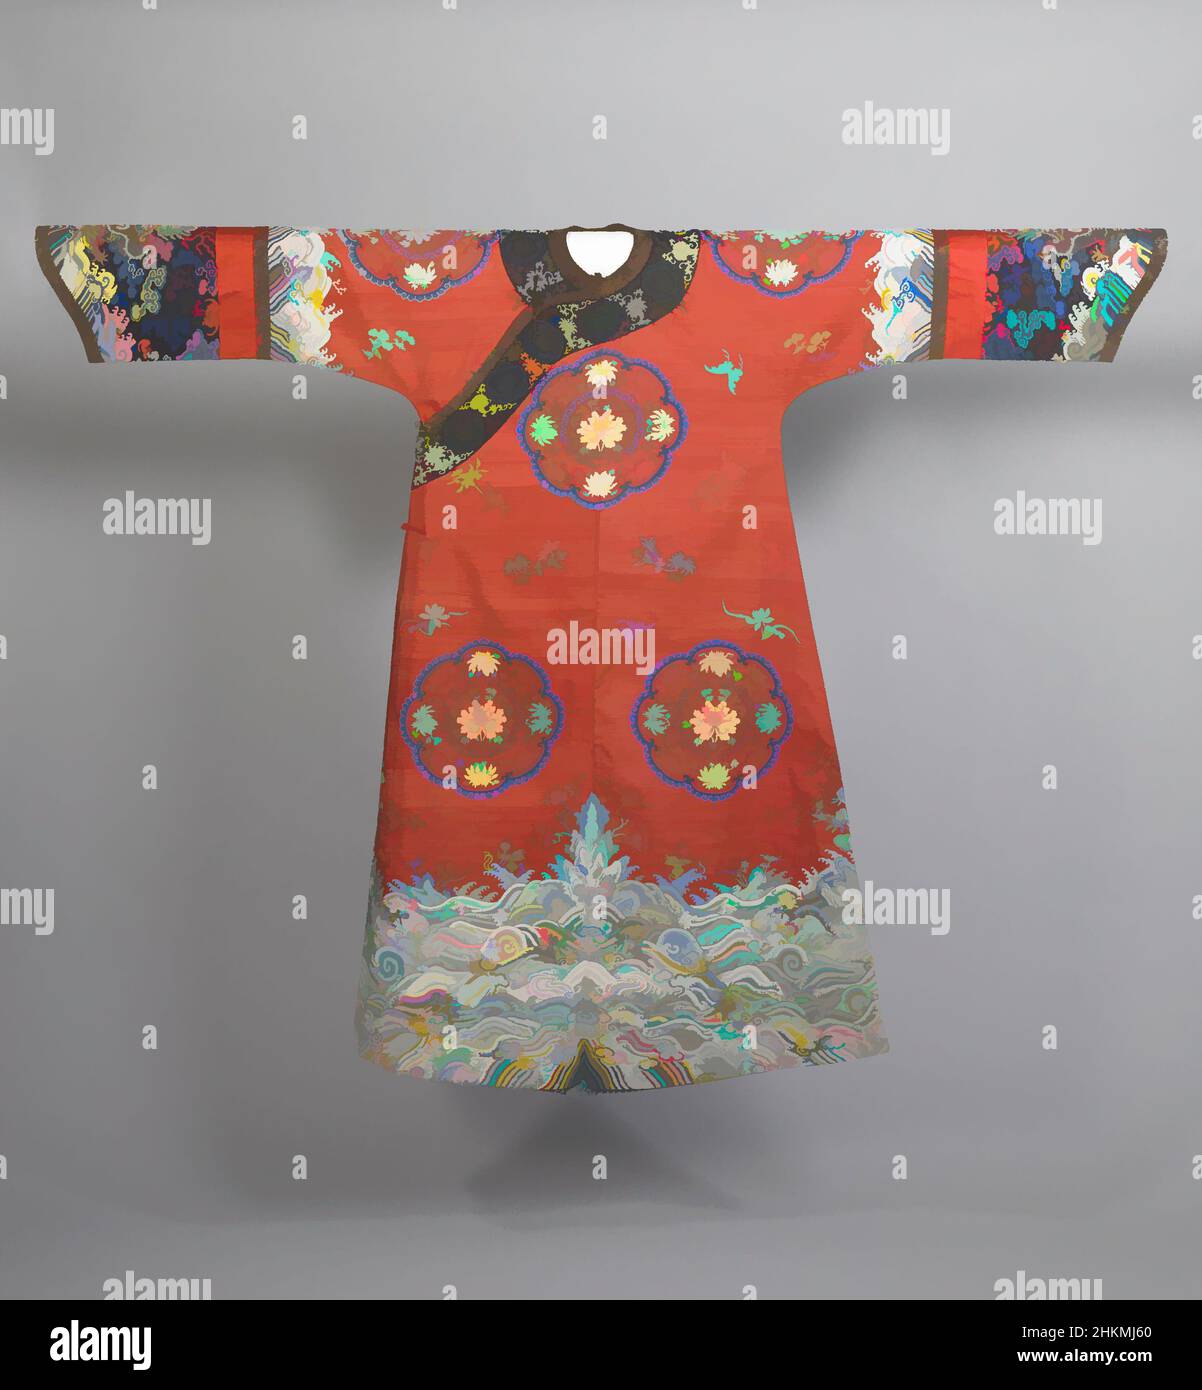 Art inspired by Manchu Woman's Informal Court Robe, Chinese, Qing ...